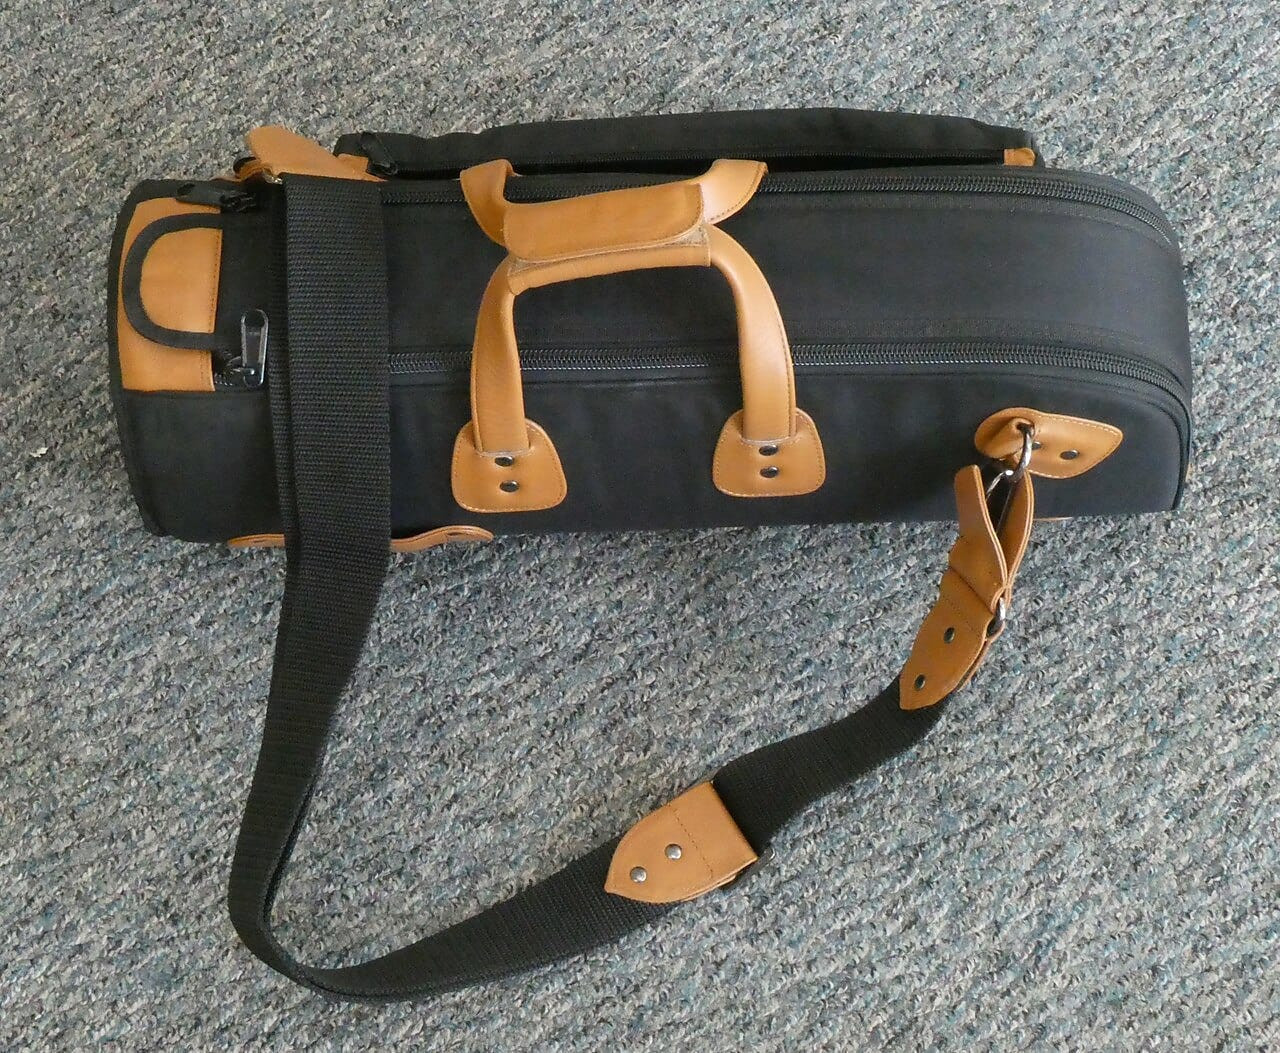 ORCA Low Profile Audio Mixer Bag for Zoom F3